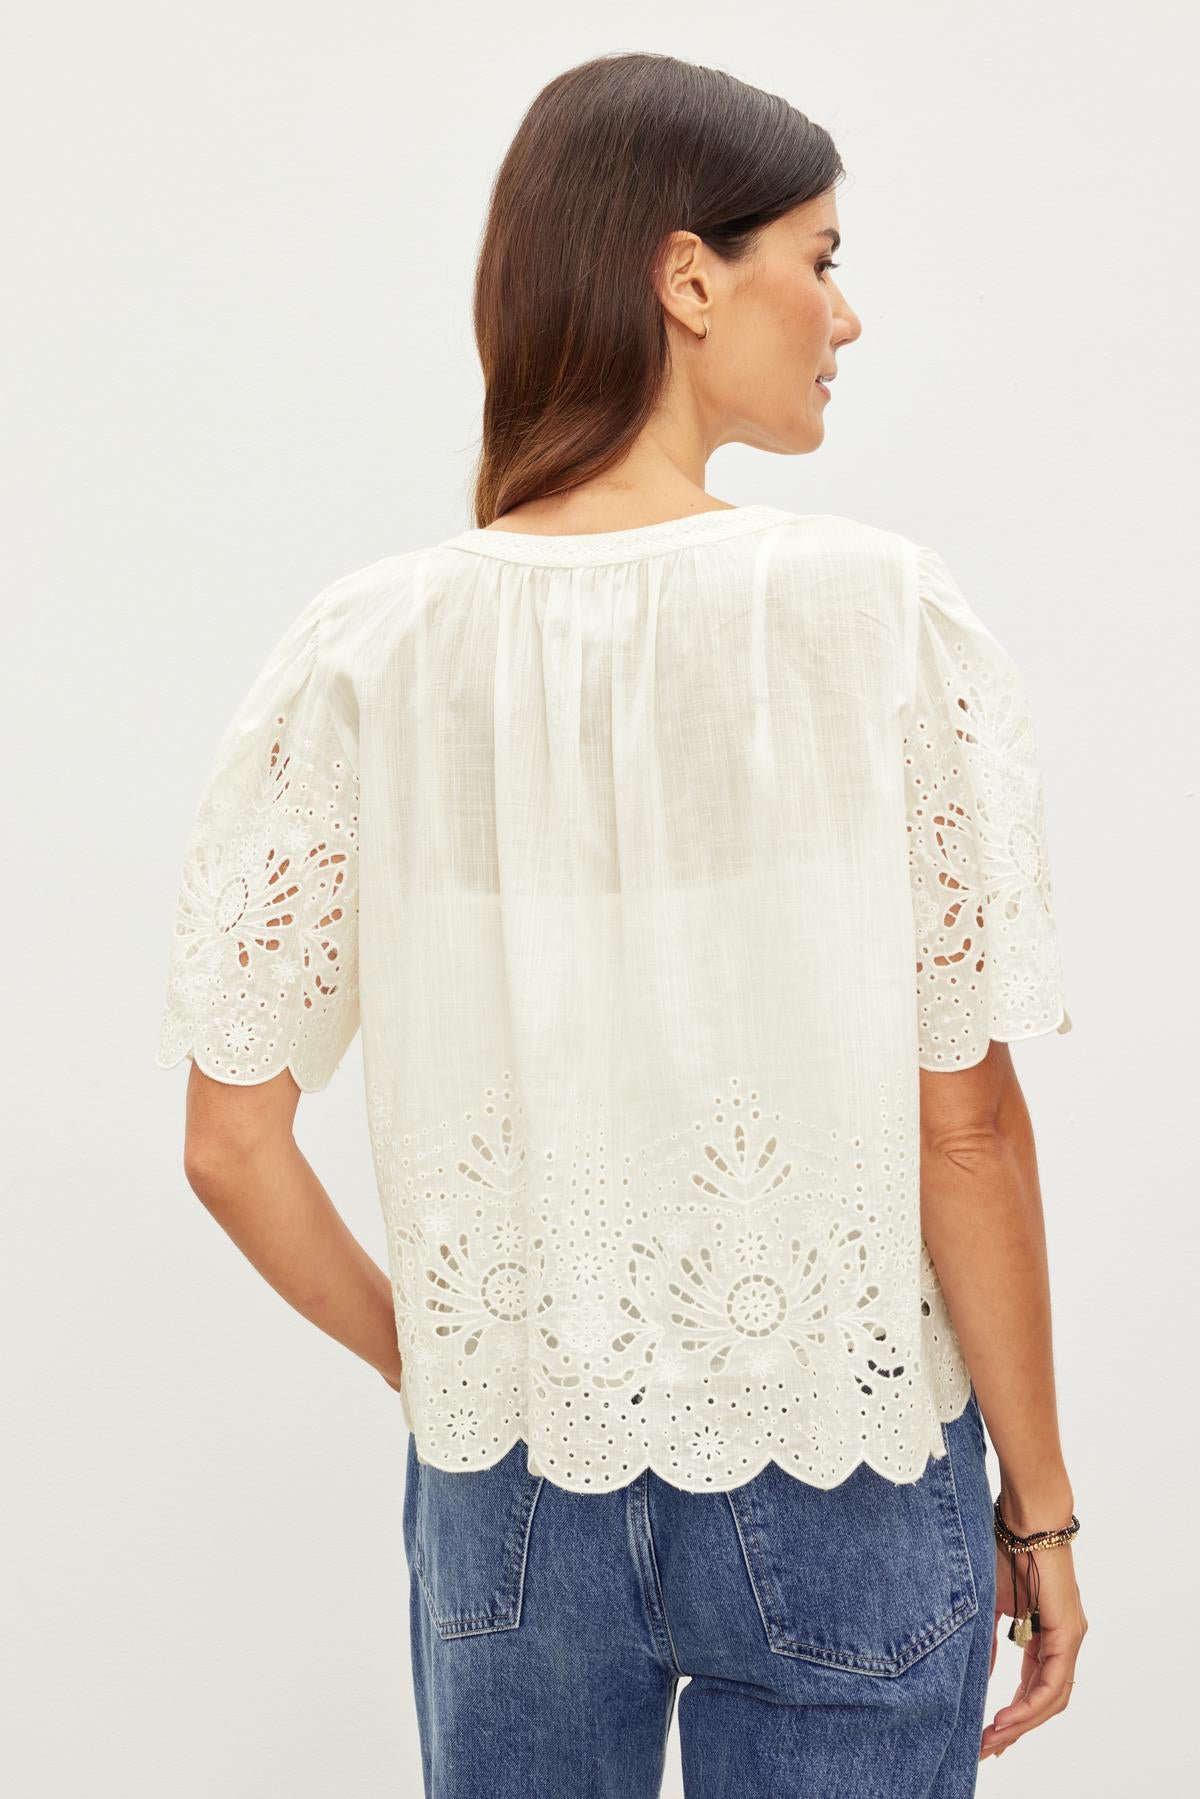   Woman in a white blouse with RAZI EMBROIDERED COTTON LACE details, viewed from the back, standing against a plain background. 